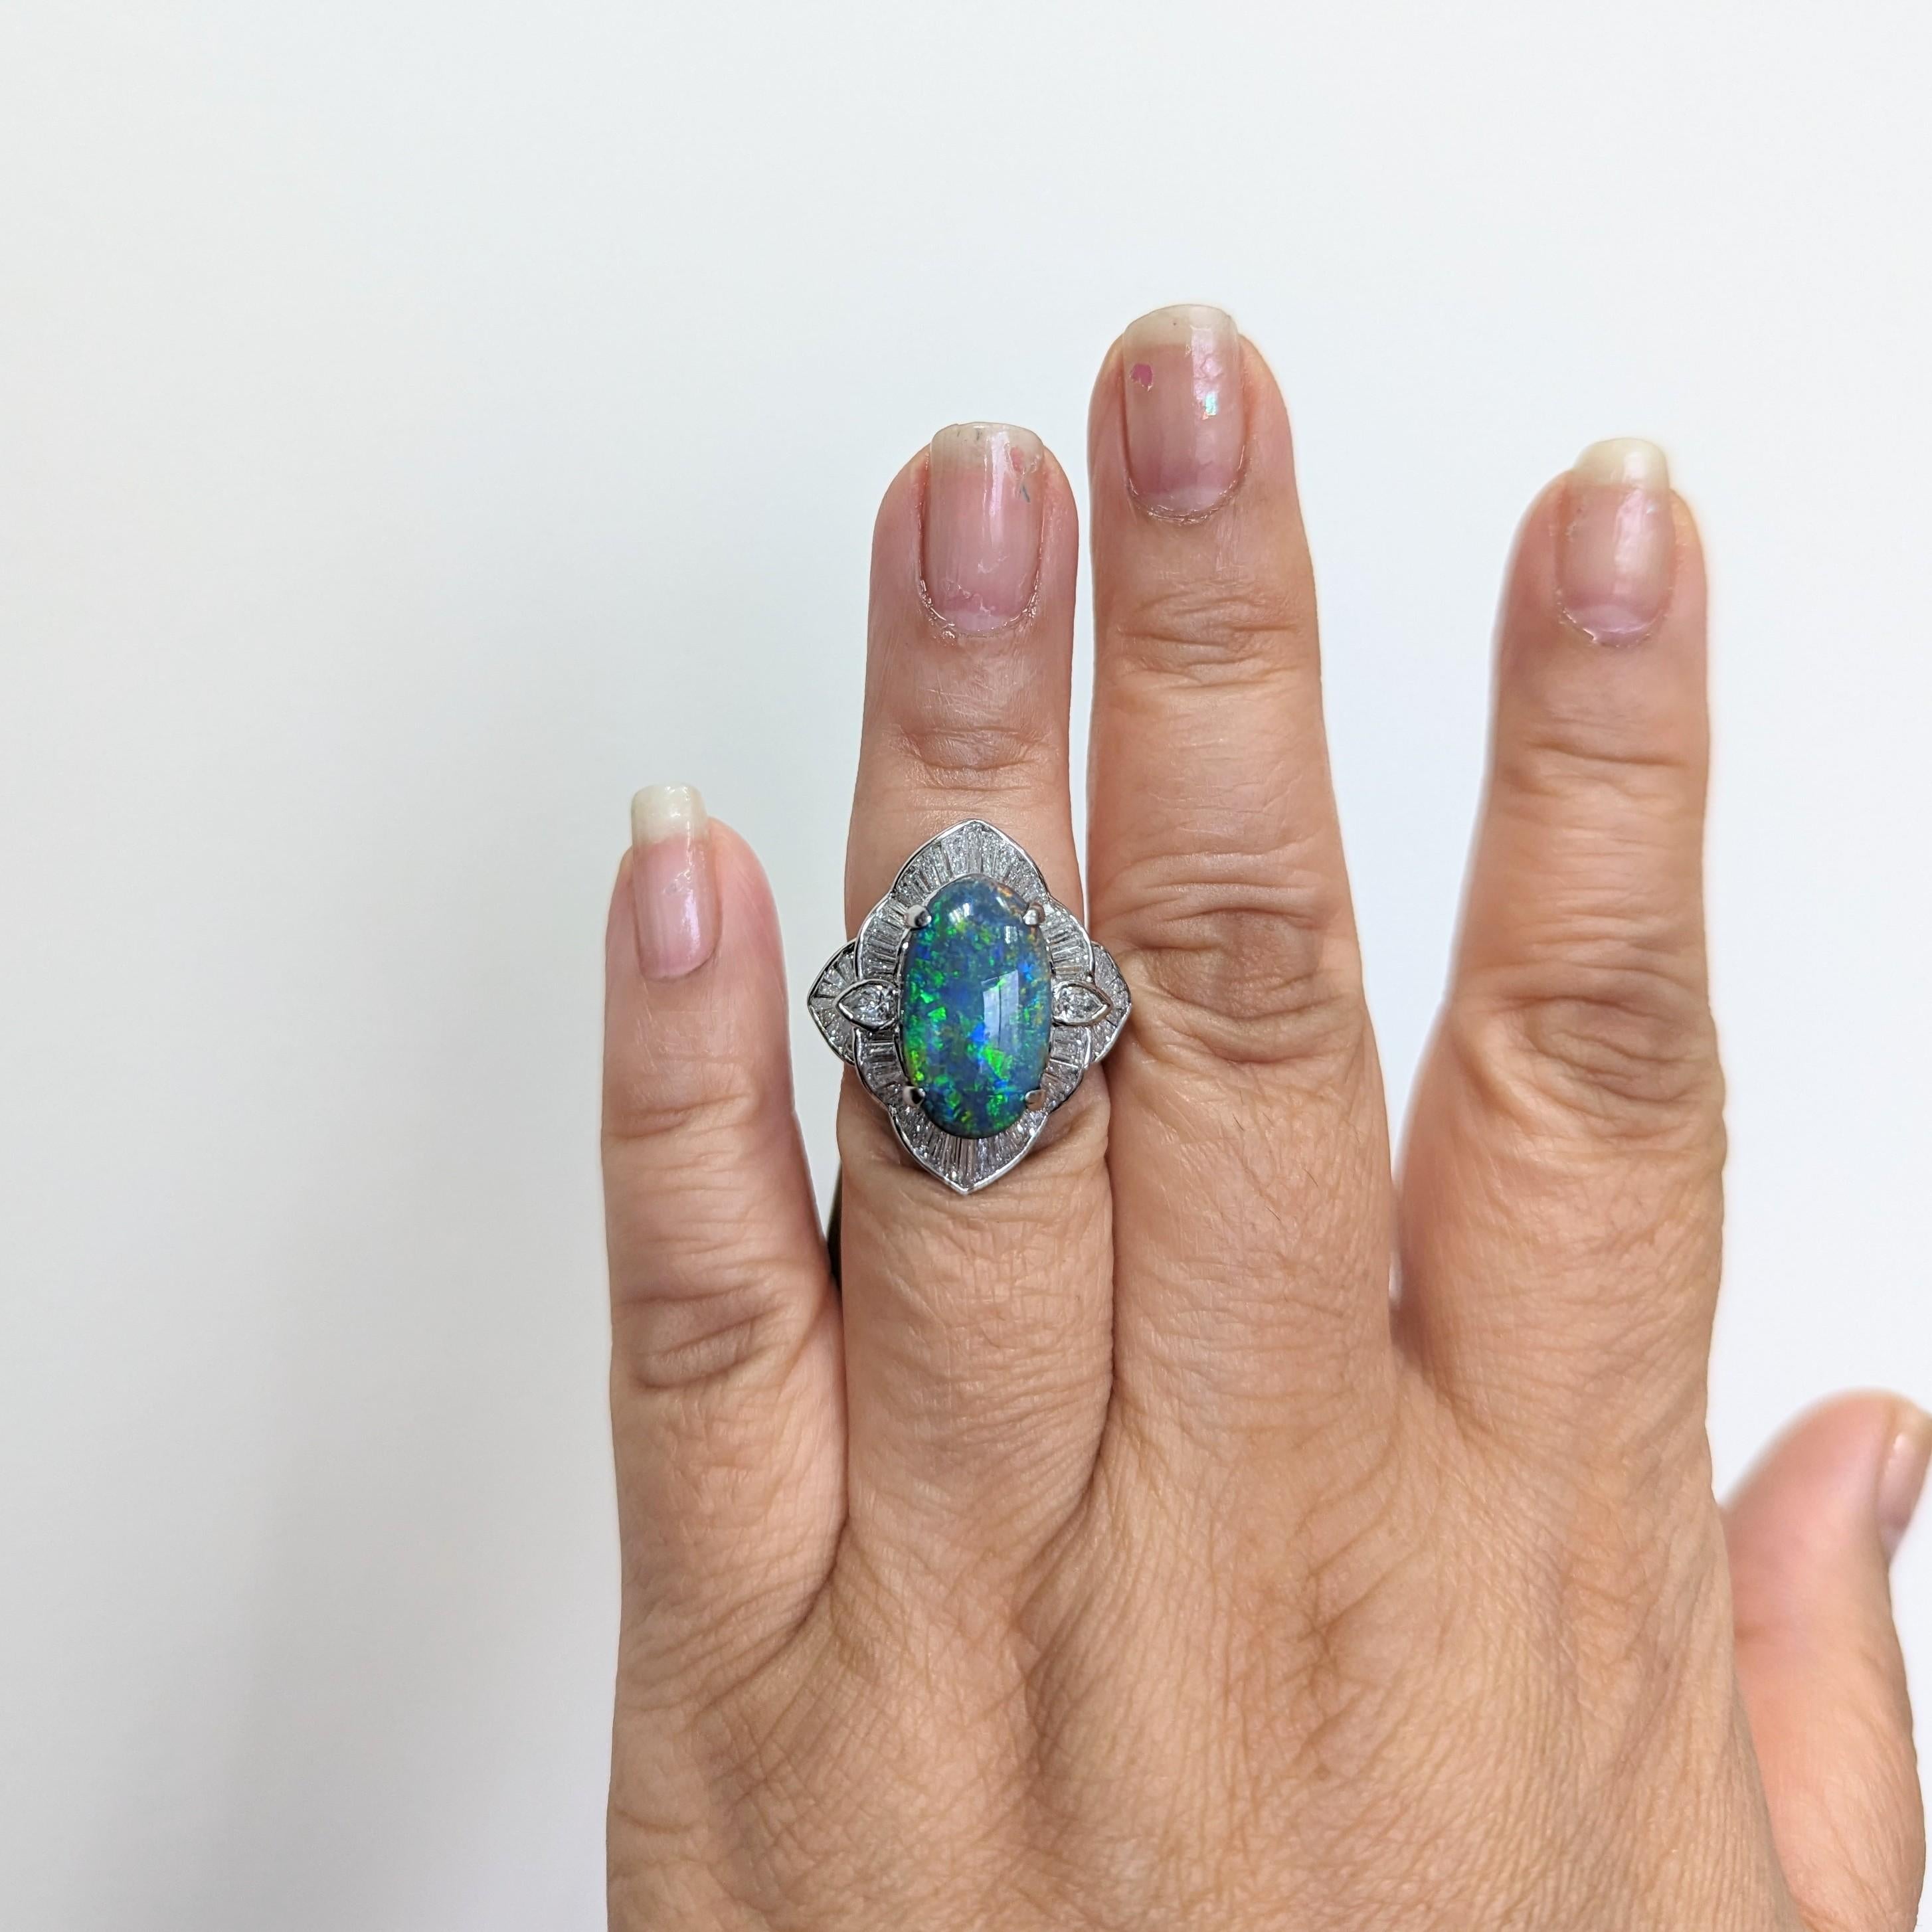 Beautiful 5.37 ct. black opal oval with 2.03 ct. good quality white diamond baguettes and pear shapes.  Handmade in platinum.  Ring size 5.75.